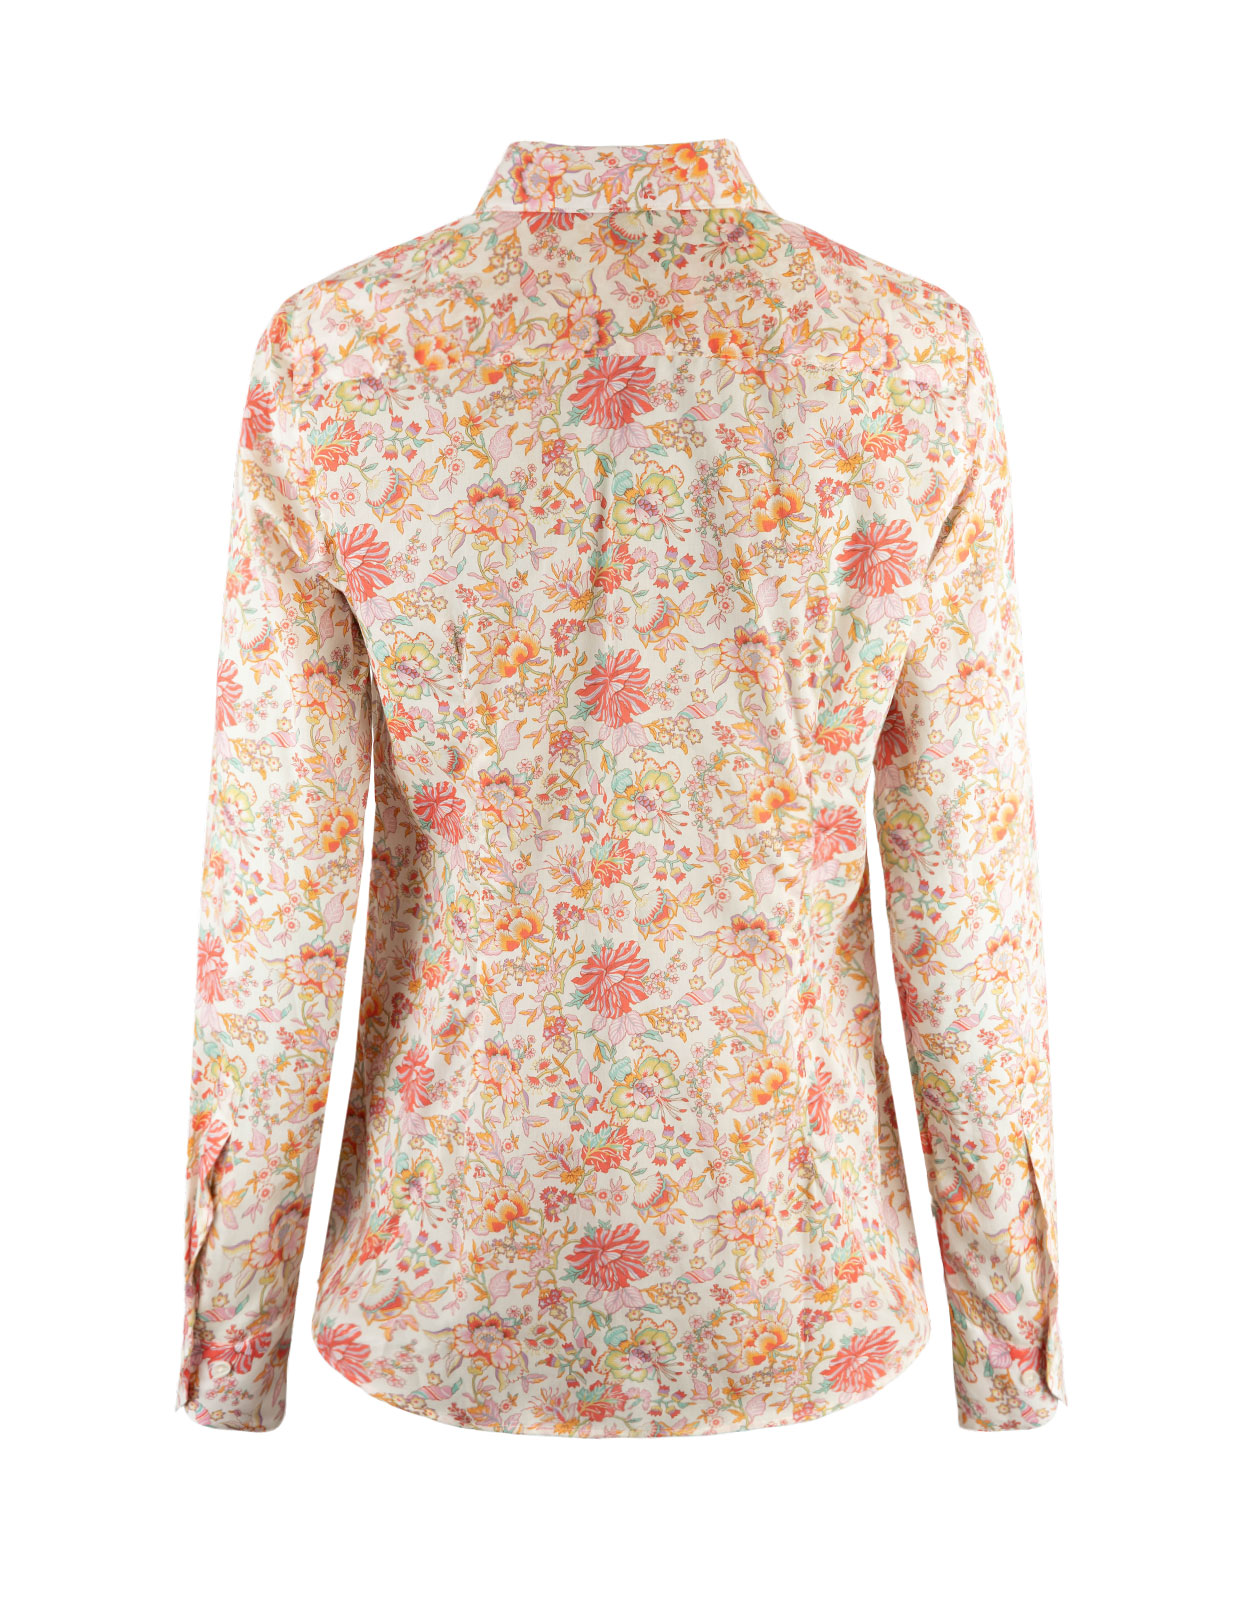 Sofie Shirt Offwhite Floral